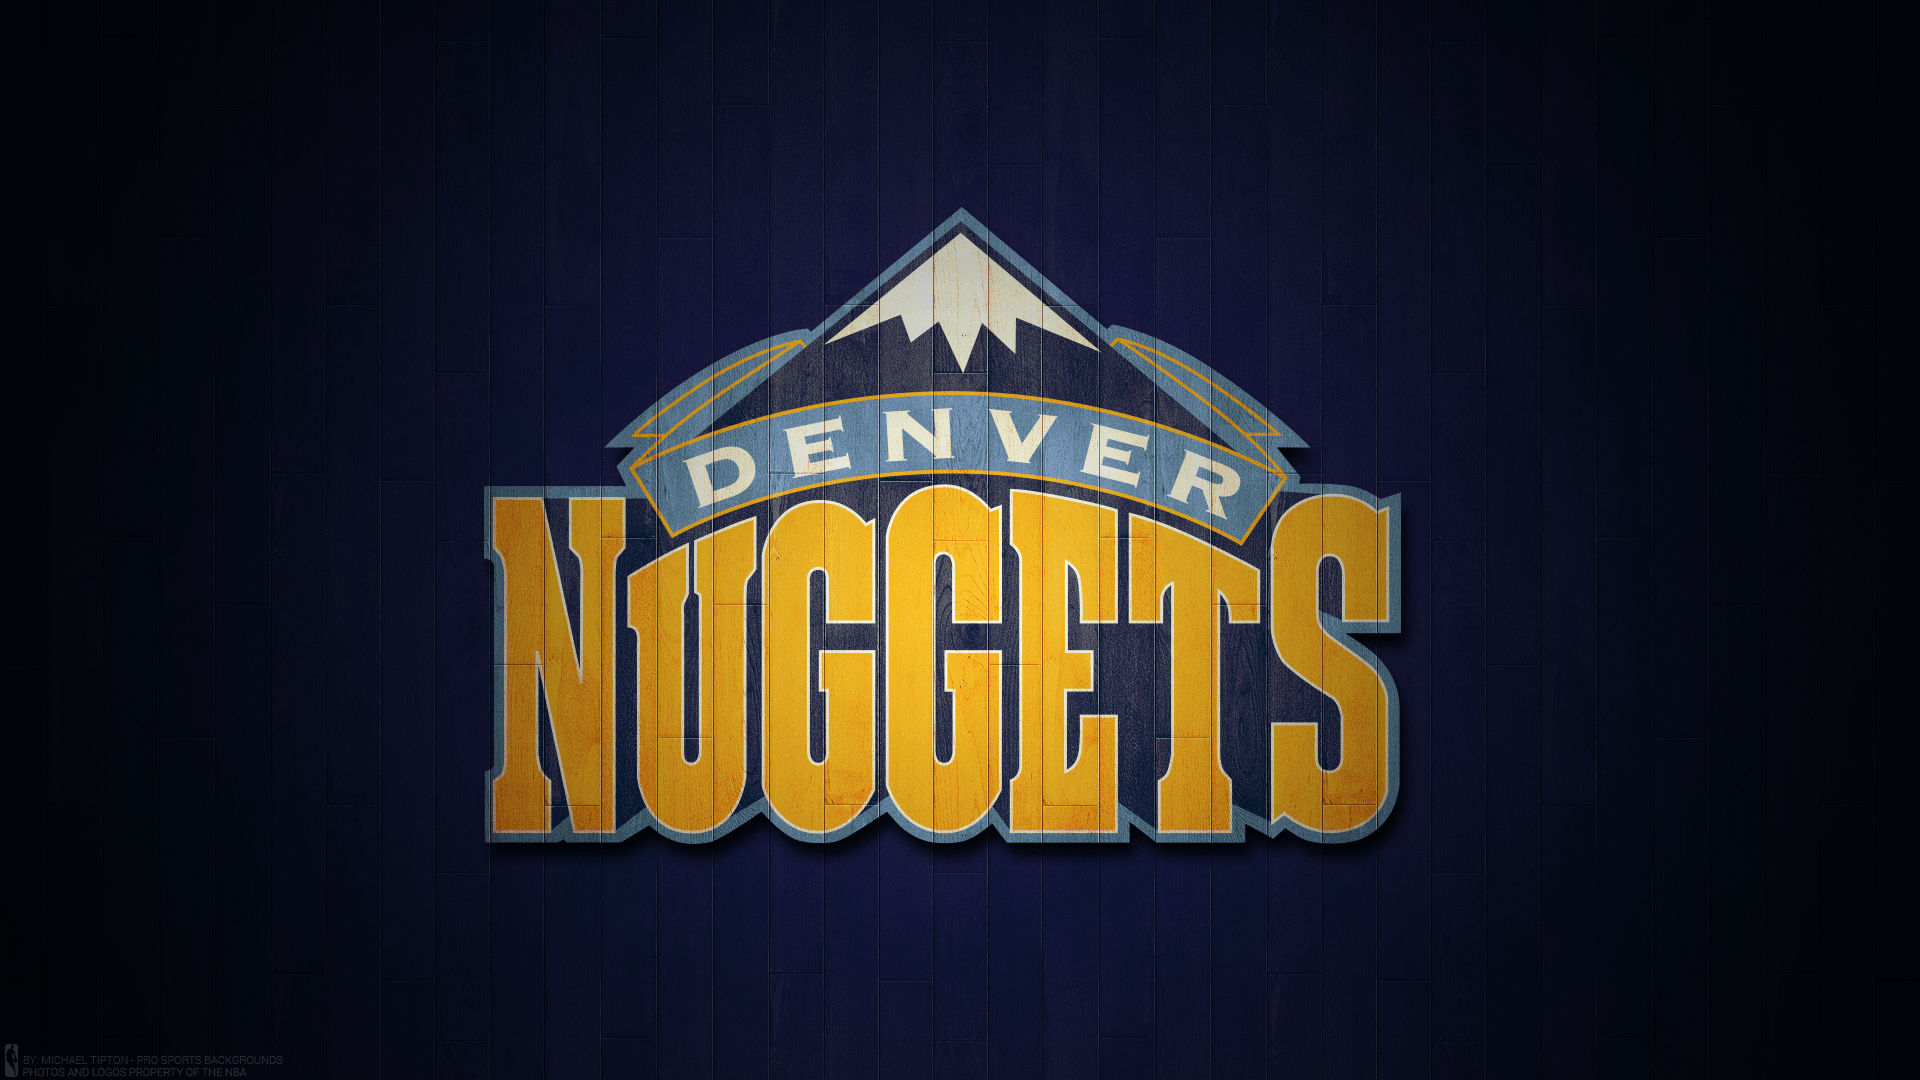 Denver Nuggets Wallpaper. iPhone. Android